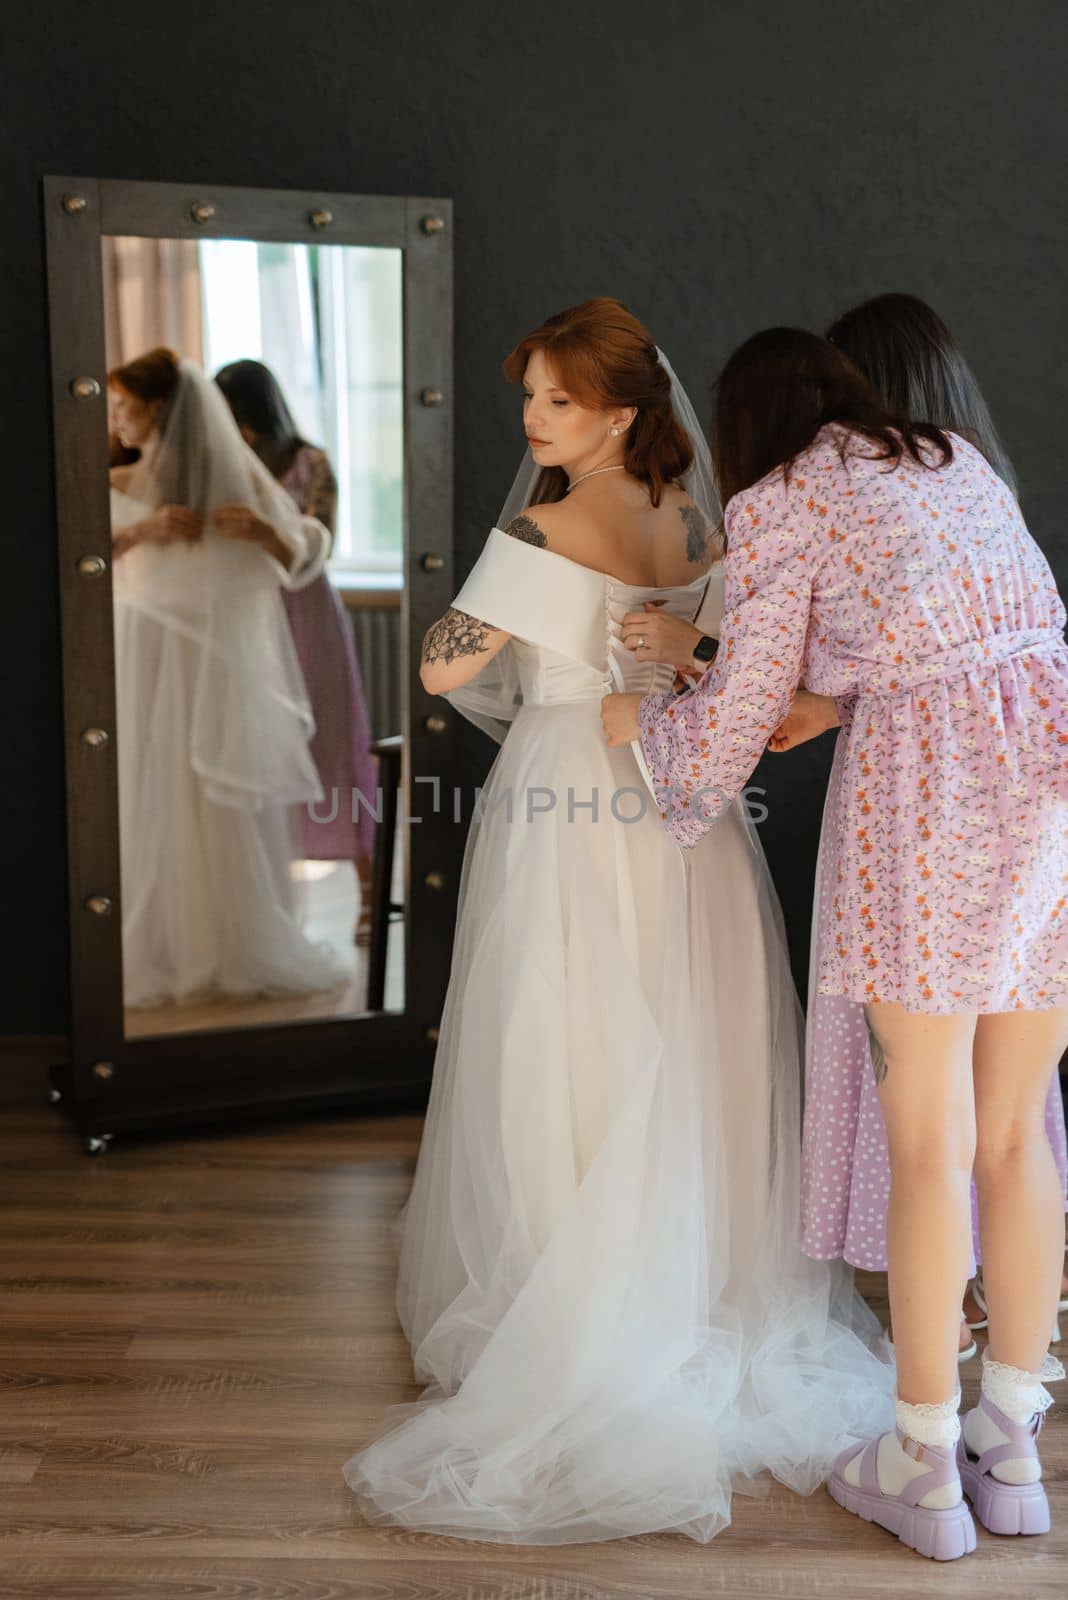 preparations for the bride with the dressing of the wedding dress by Andreua